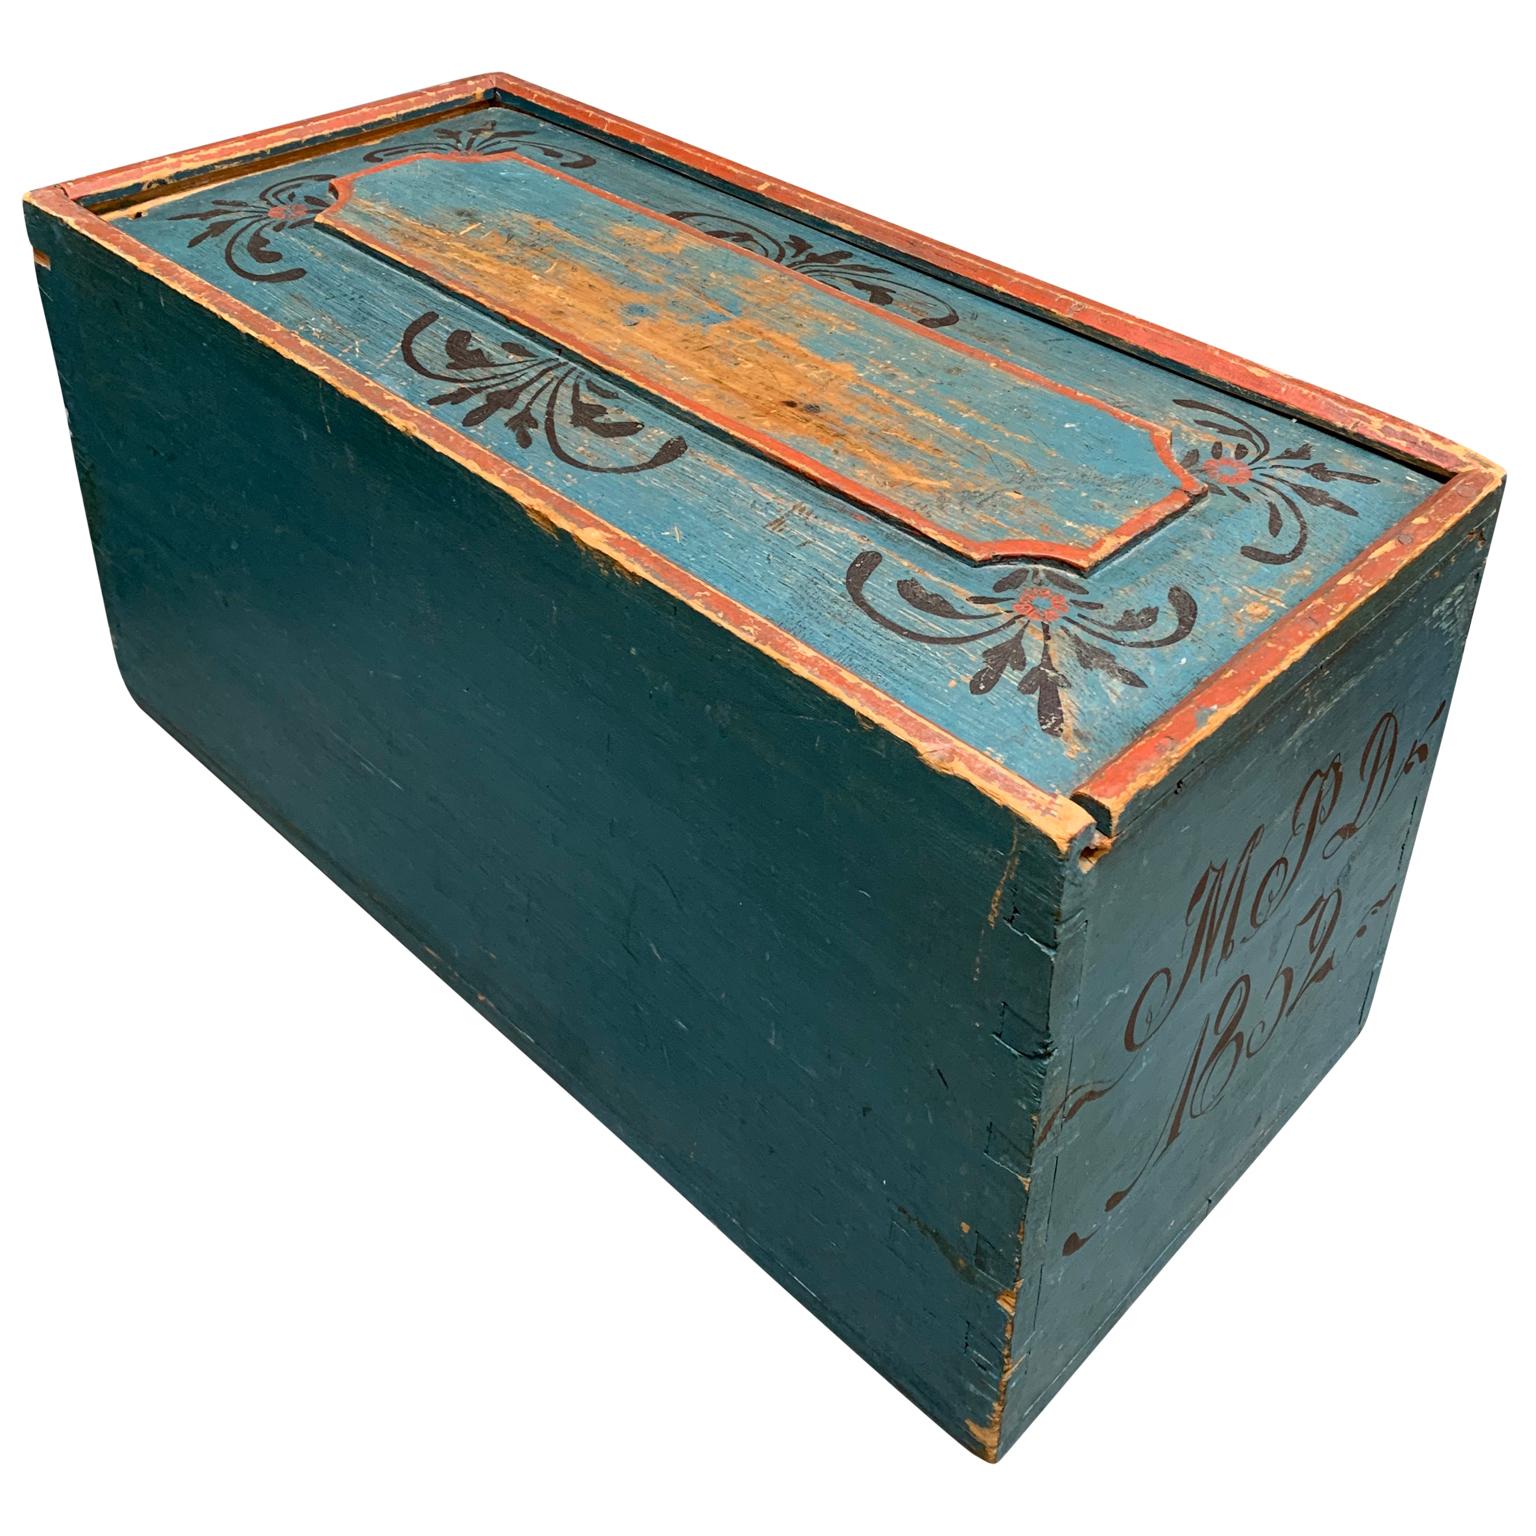 Hand-Painted Original Blue and Red Painted Swedish Bridal Folk Art Box Dated 1852